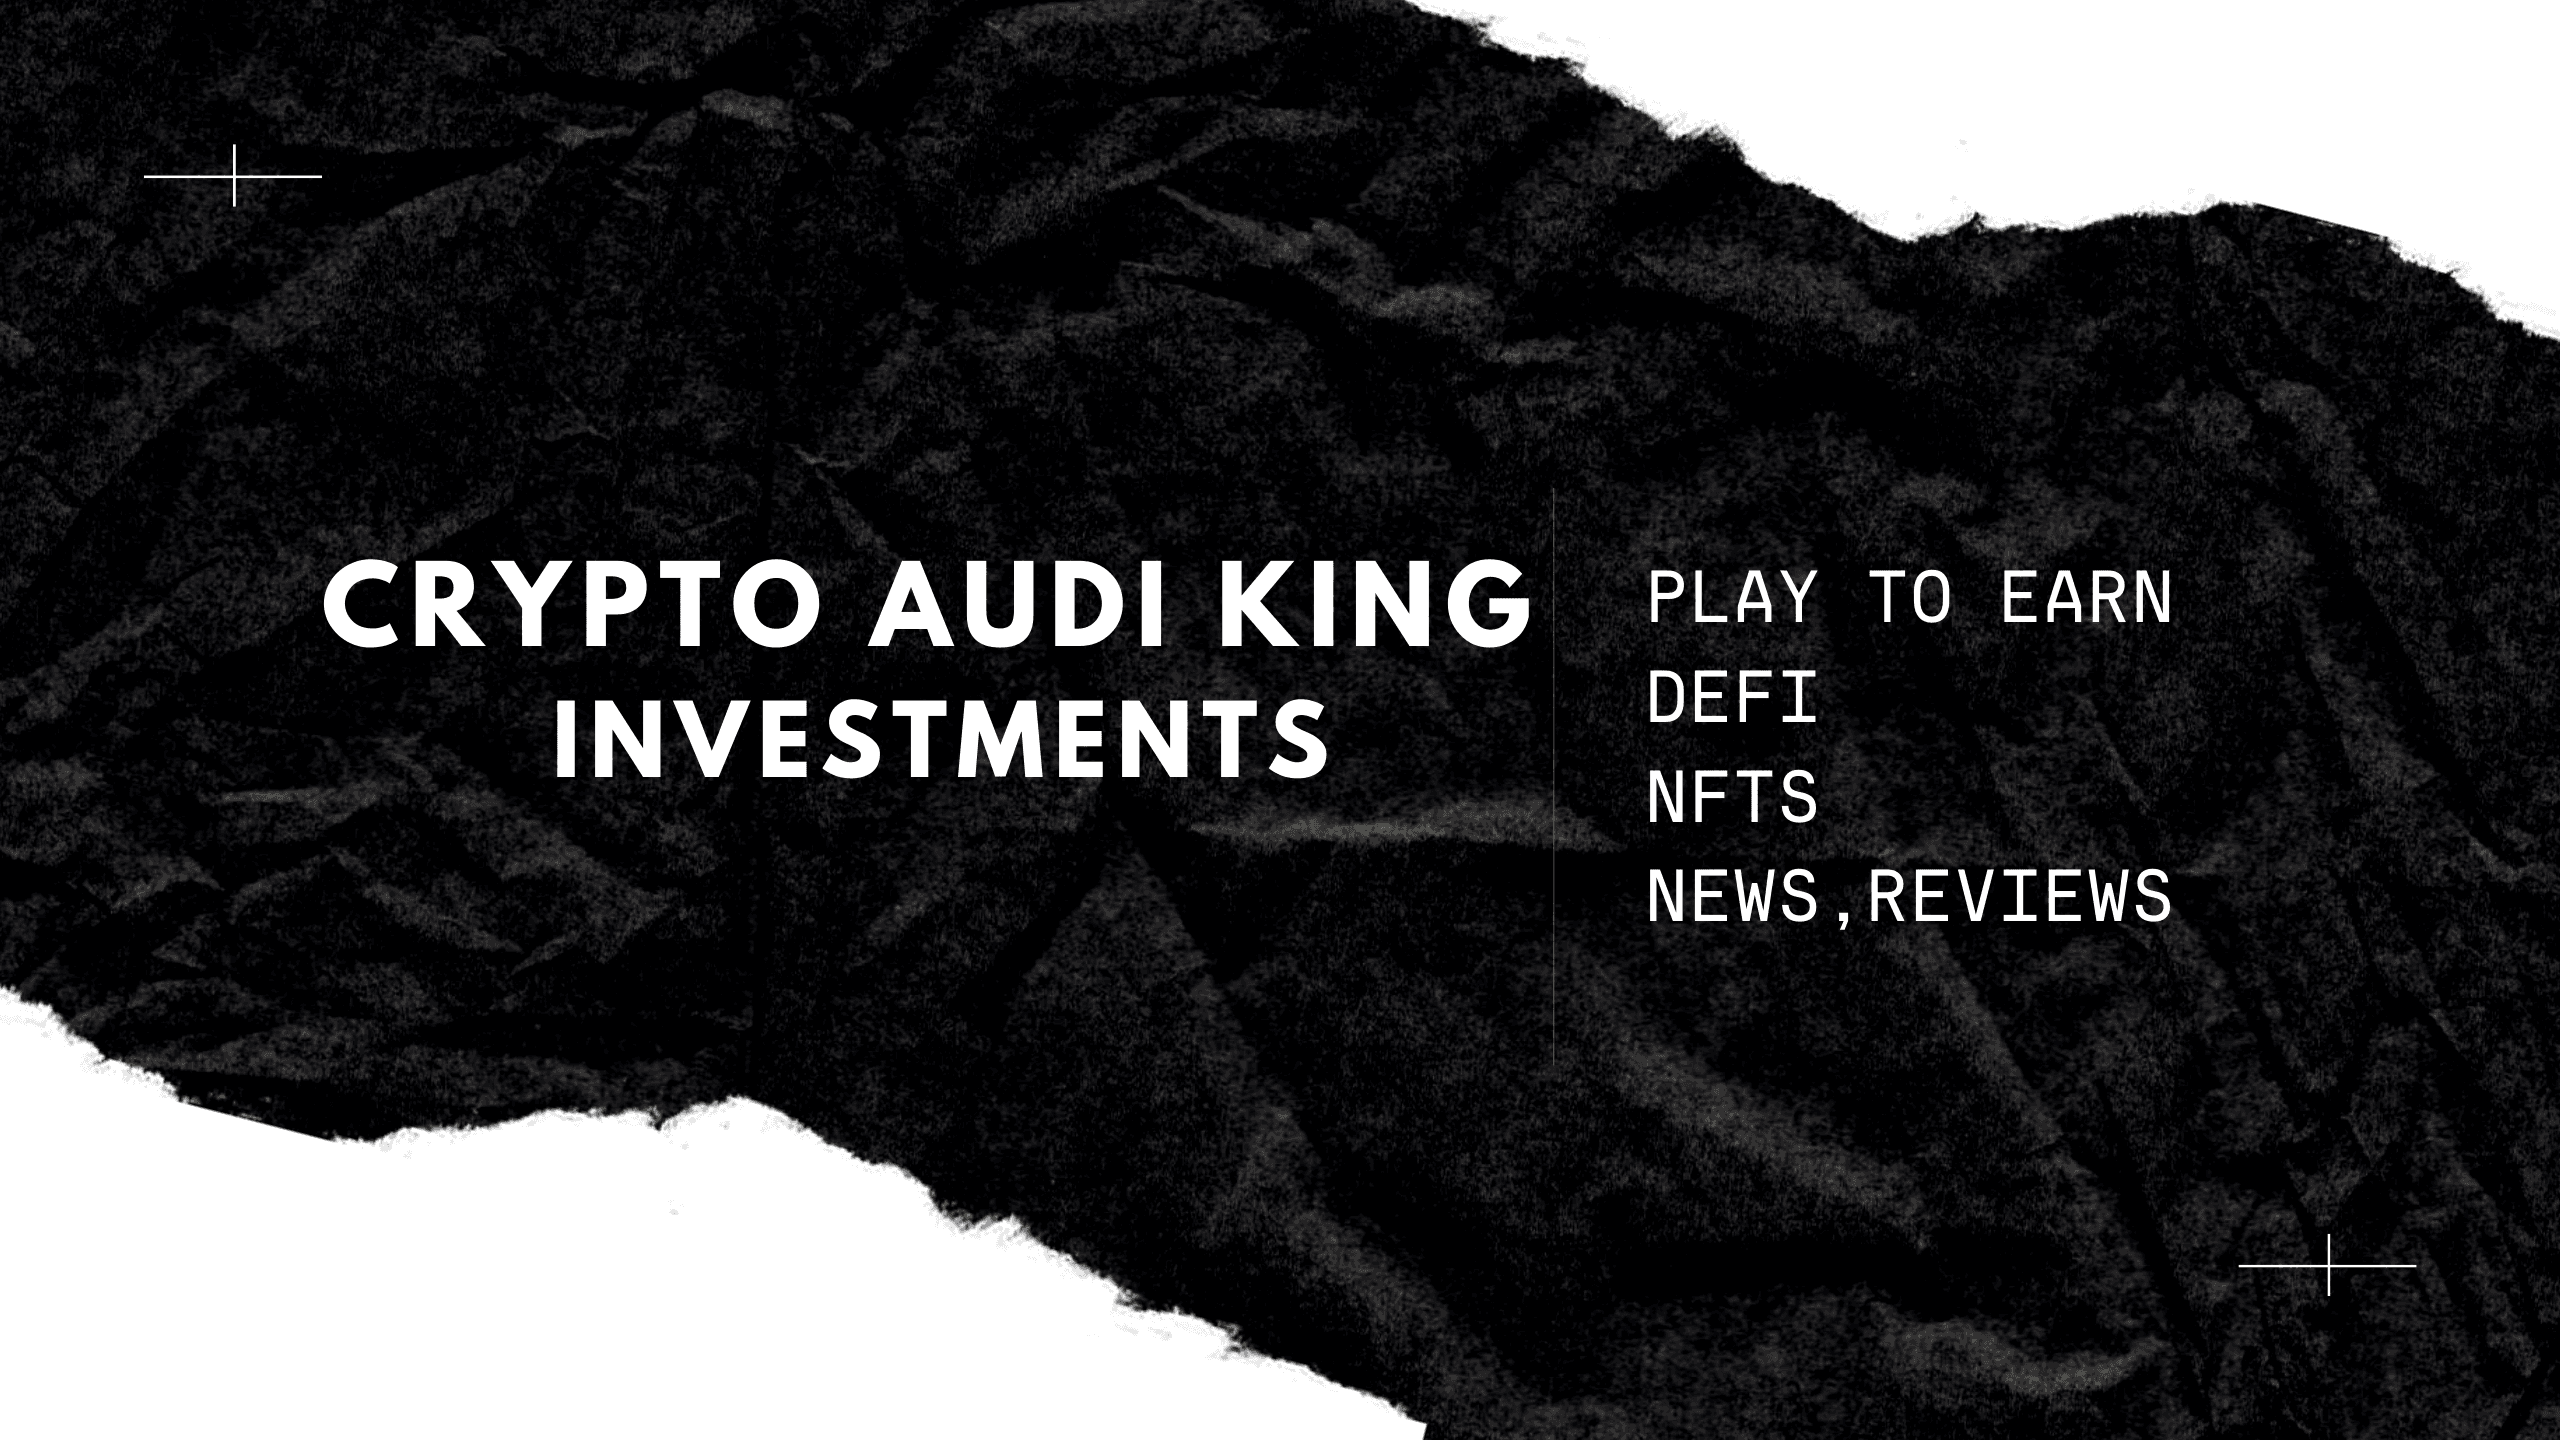 CryptoAudiKing_Investments banner